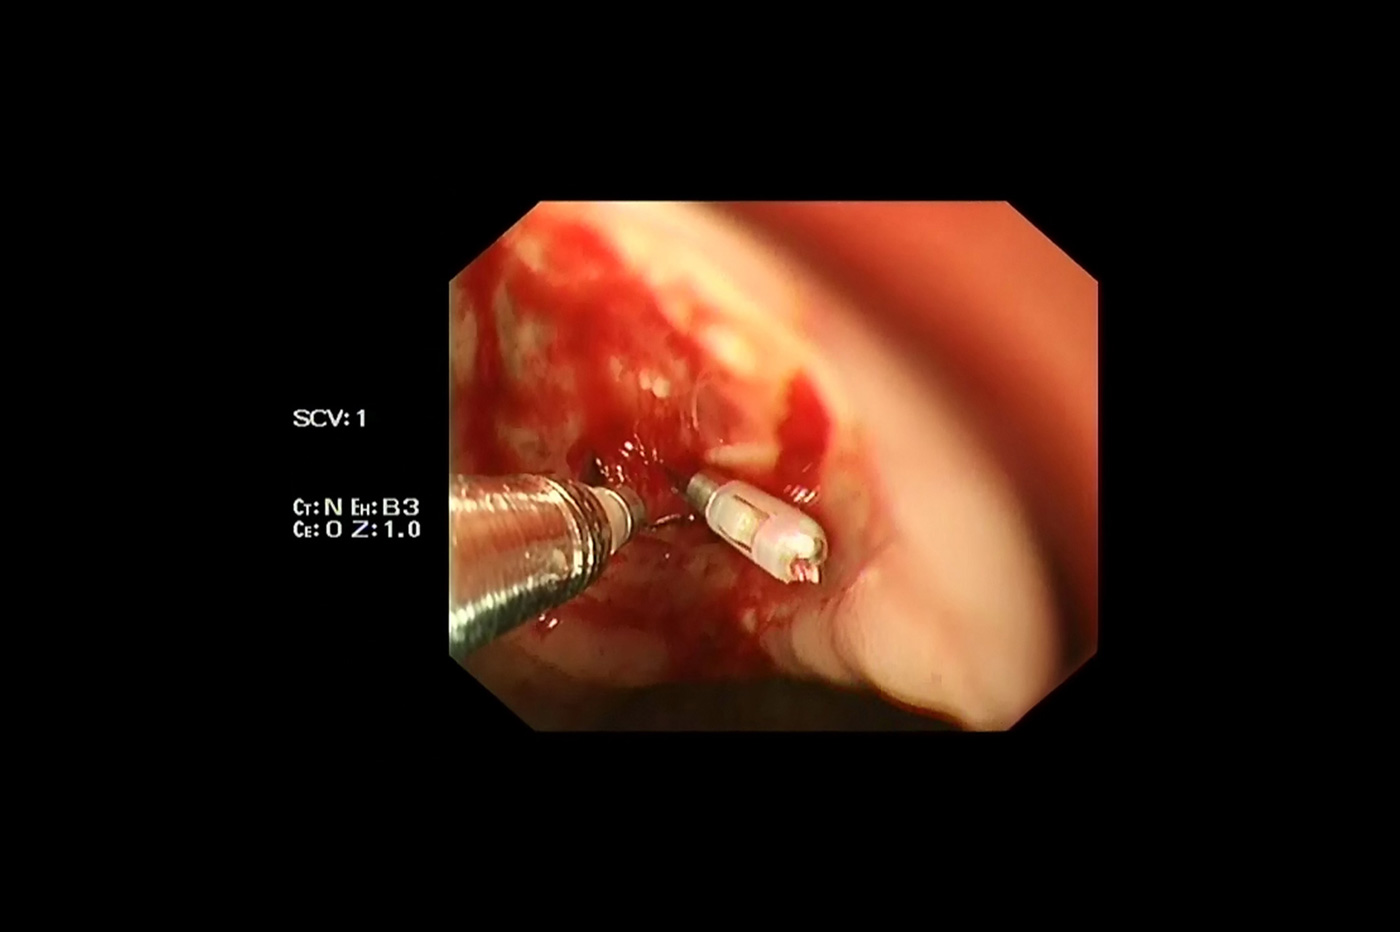 Endoscopic hemostasis, an endoscopic therapy involving surgery through endoscope with various techniques and tools, is an effective means to control bleeding in ulcers